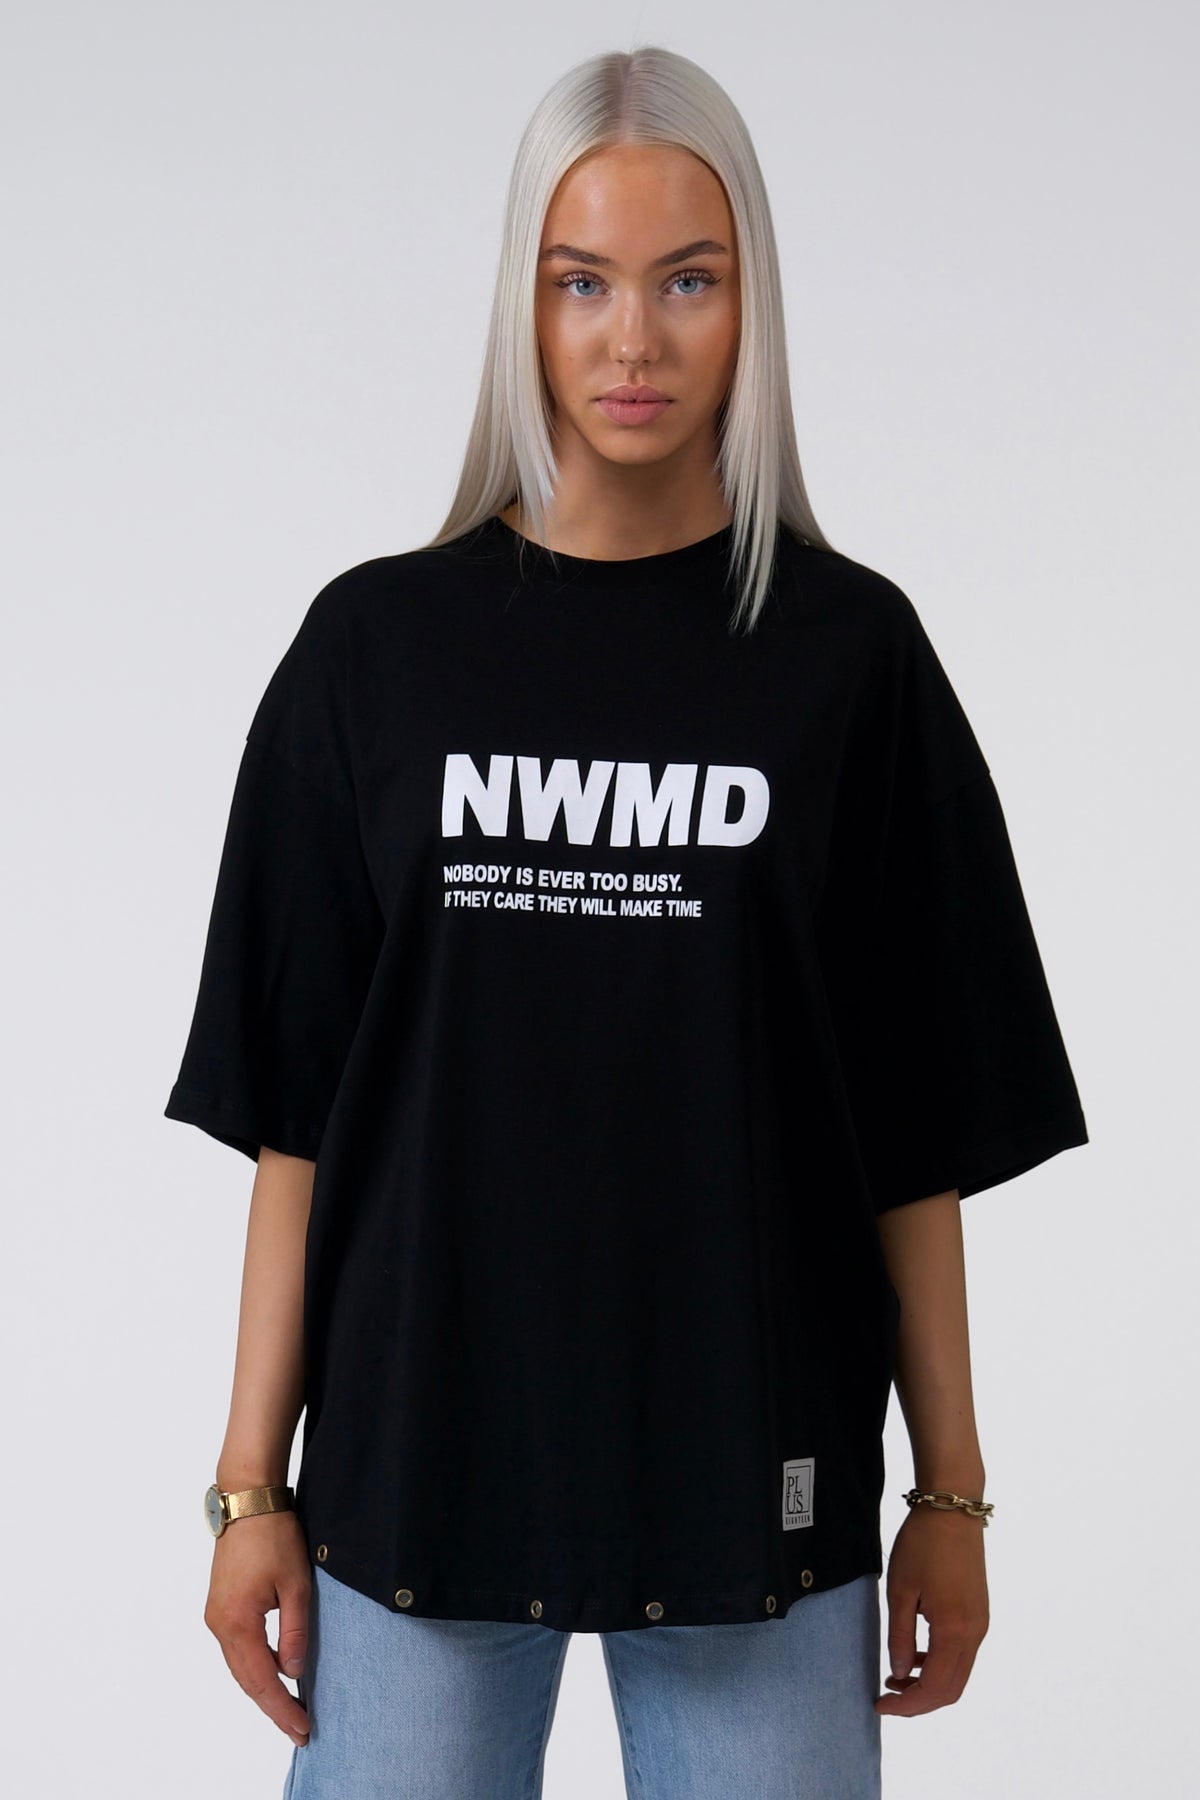 NWMD Oversized Black T-shirt